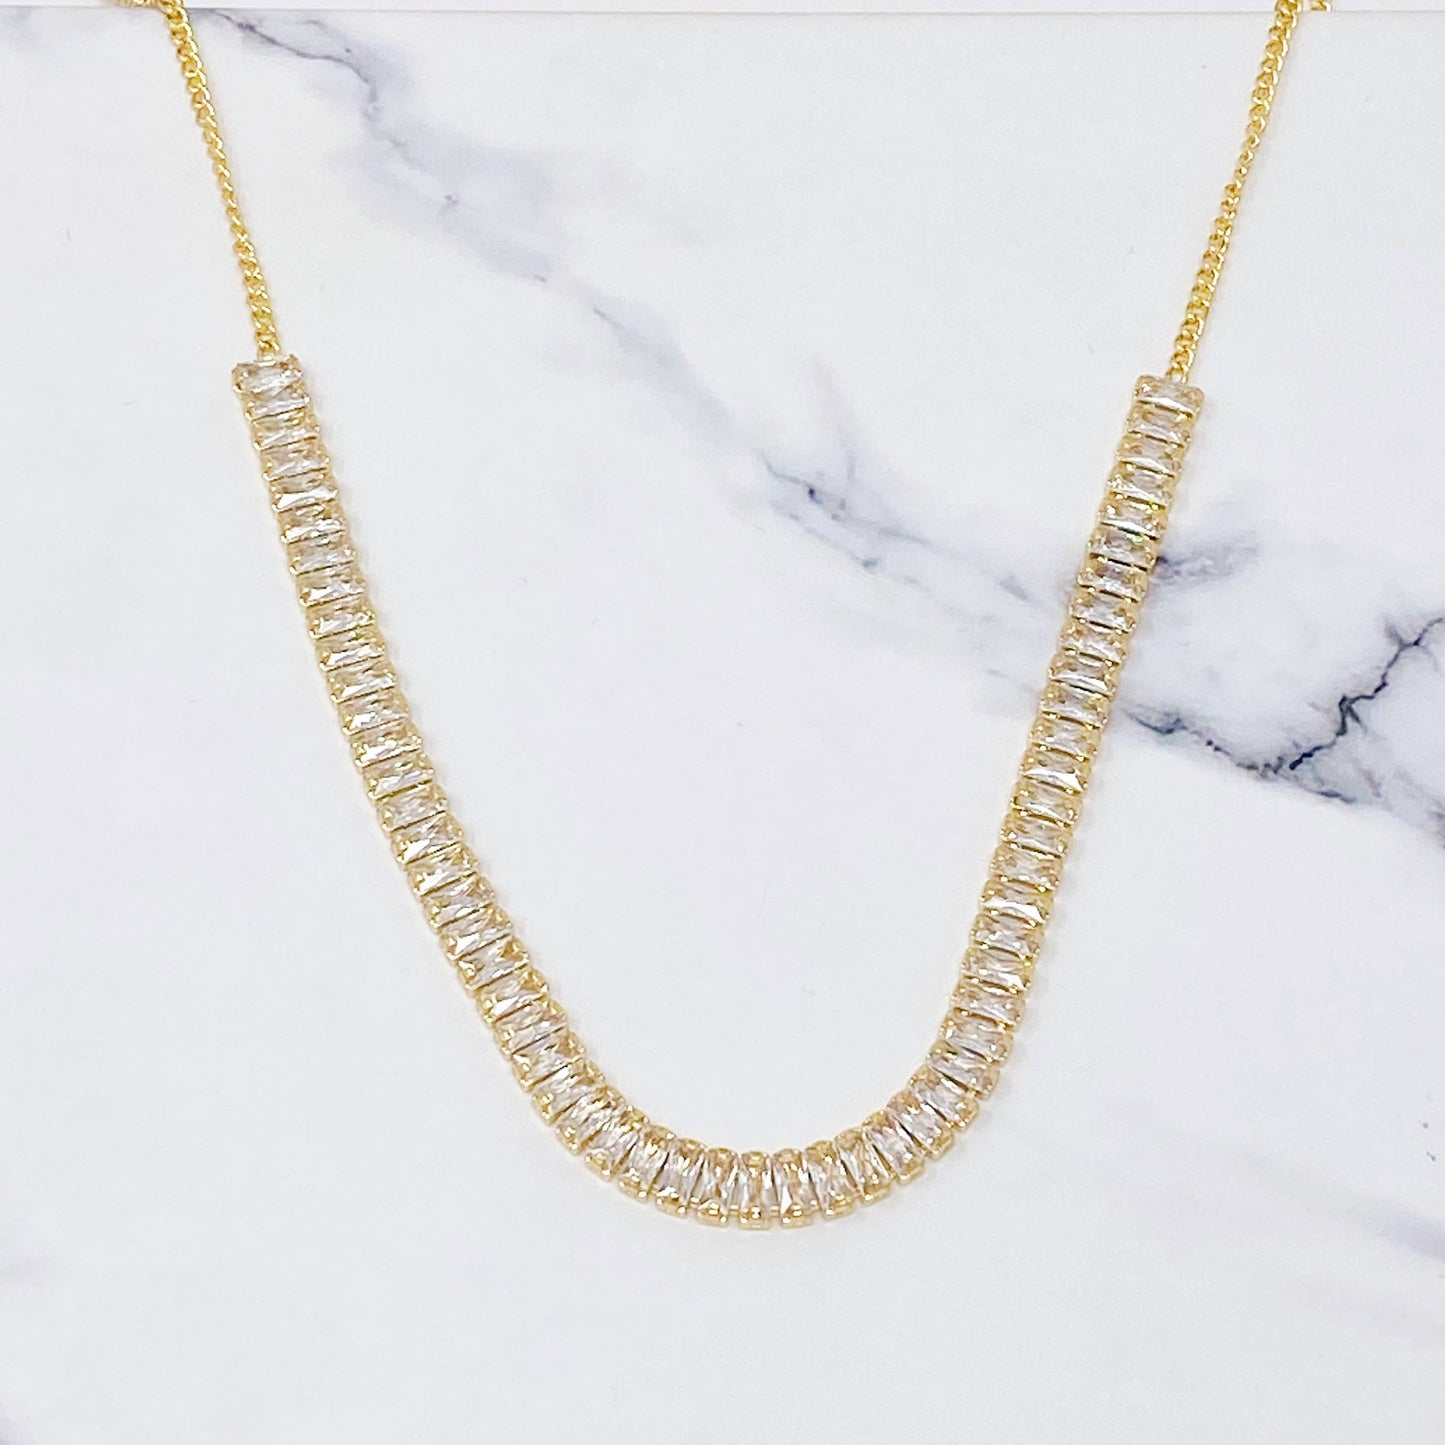 Ellison+Young - Classy Shine Necklace